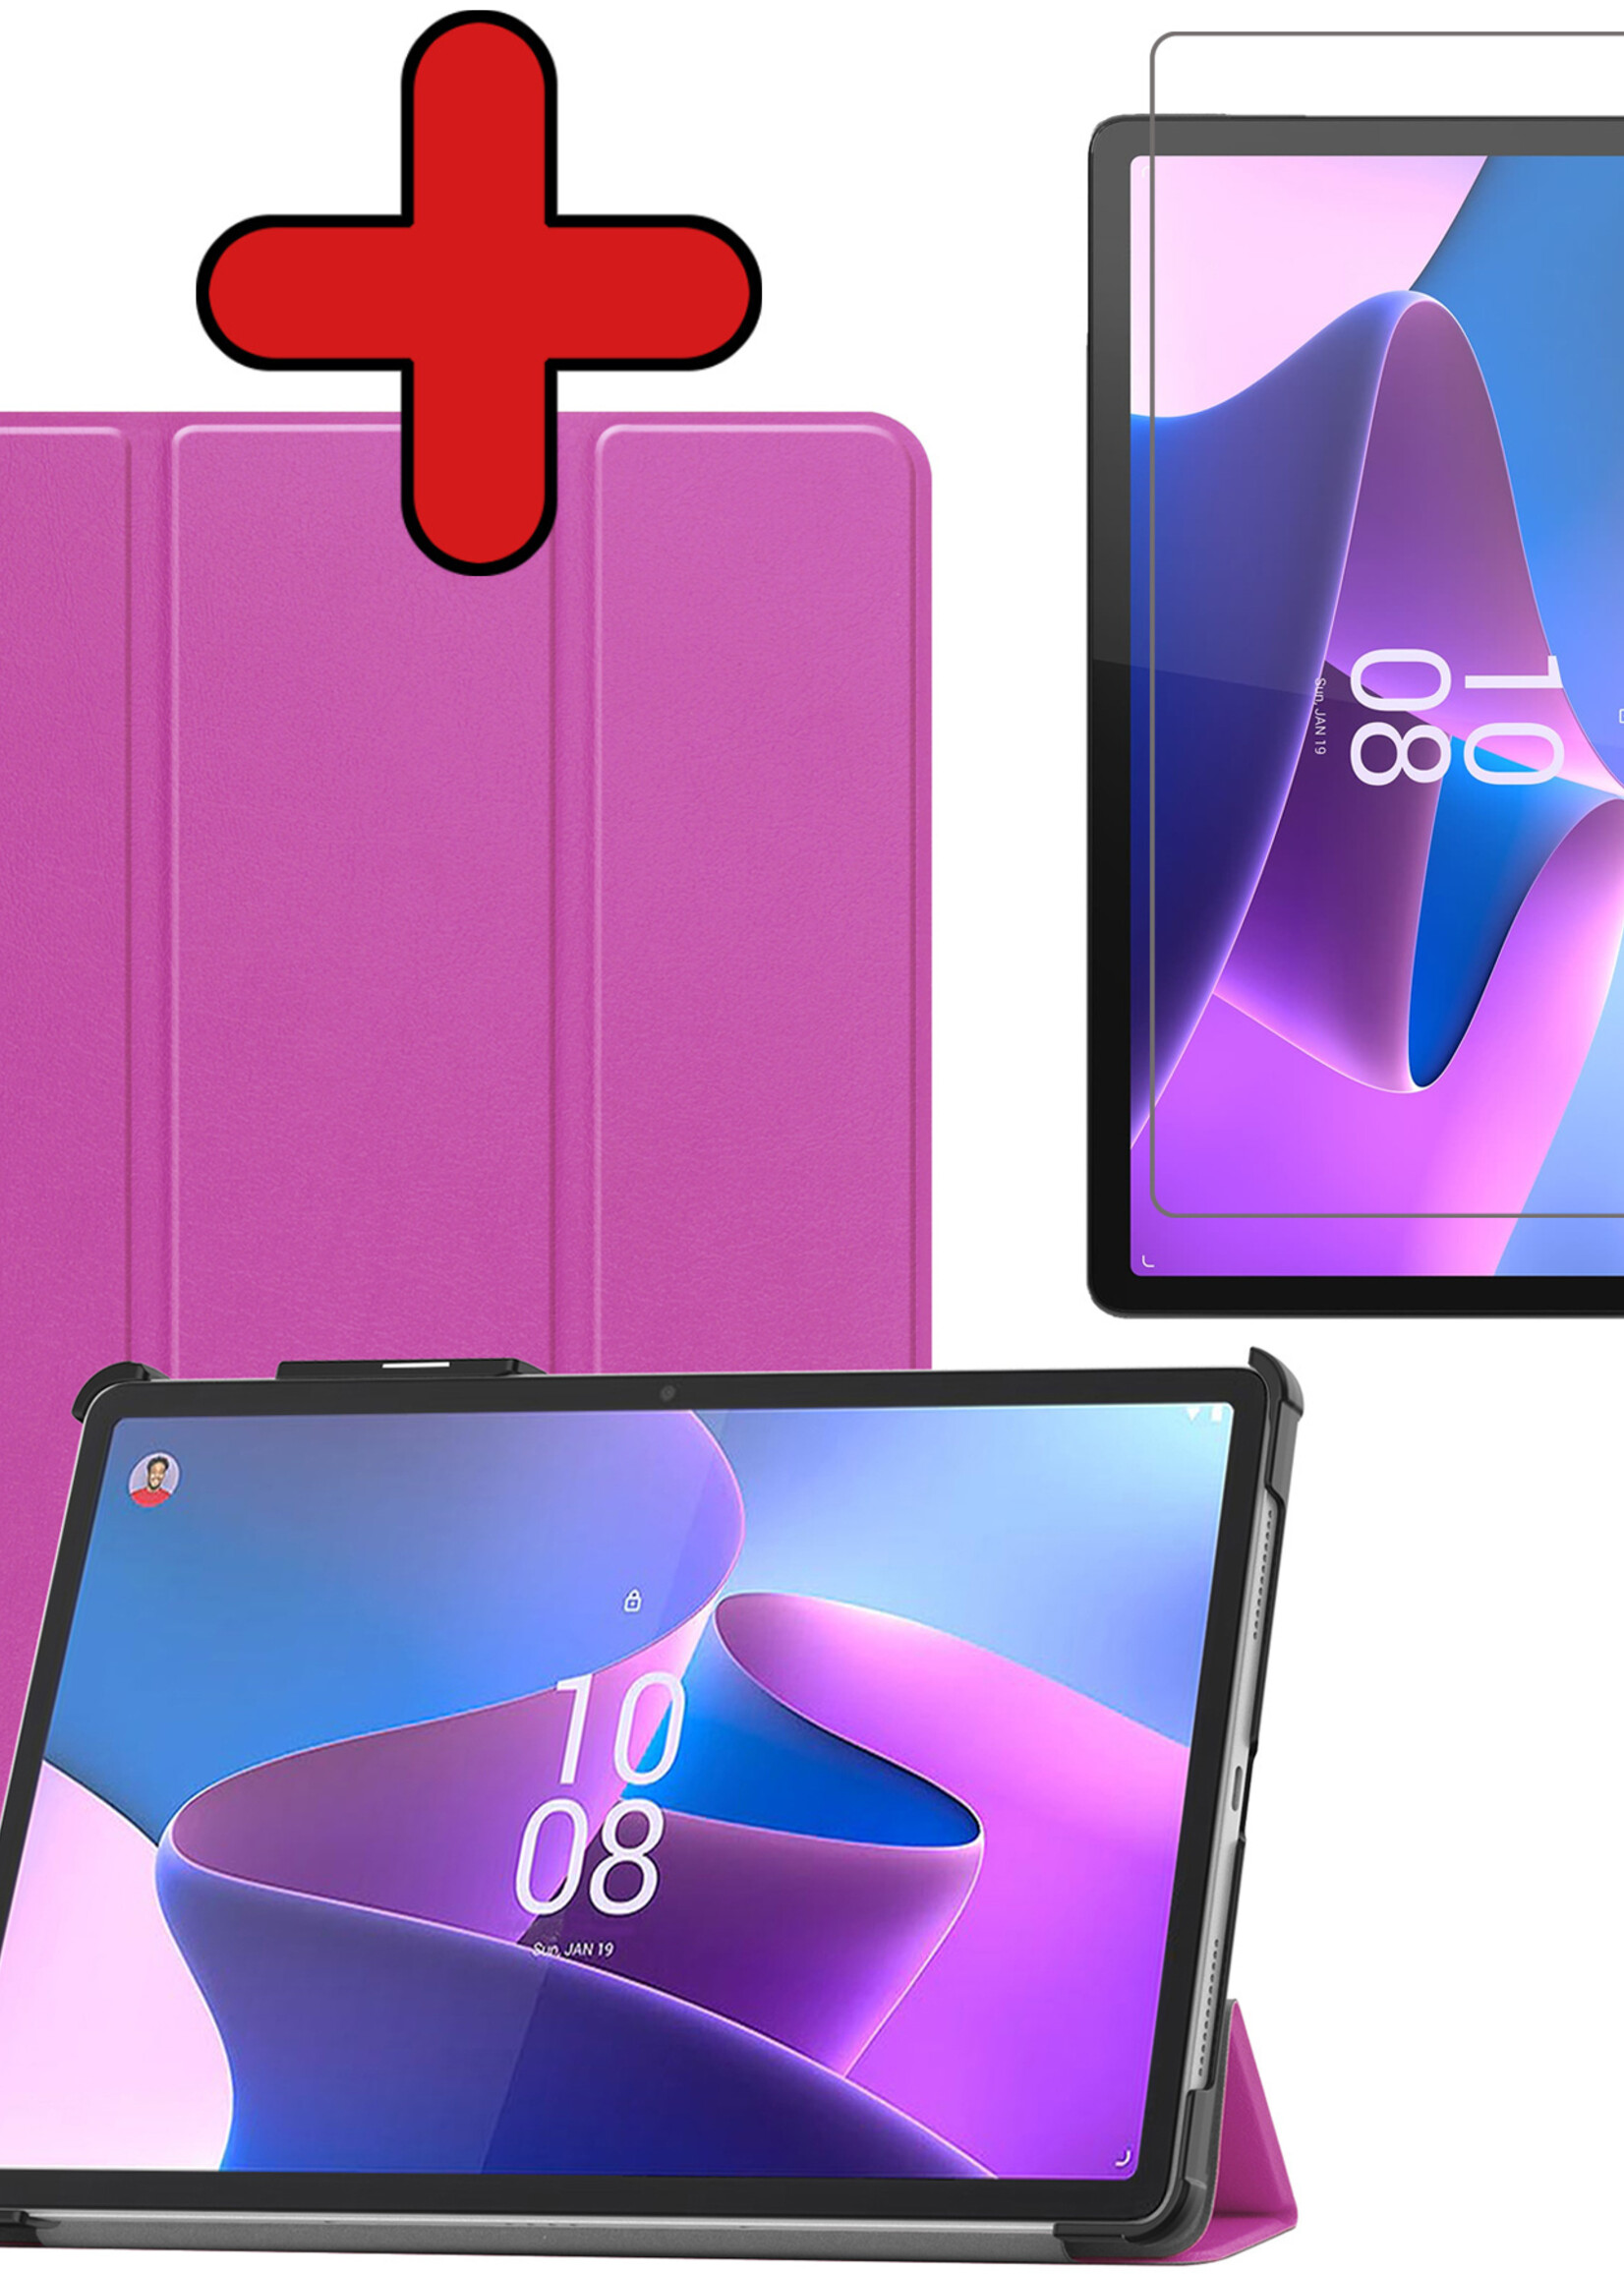 BTH Hoes Geschikt voor Lenovo Tab P11 Pro Hoes Book Case Hoesje Trifold Cover Met Uitsparing Geschikt voor Lenovo Pen Met Screenprotector - Hoesje Geschikt voor Lenovo Tab P11 Pro Hoesje Bookcase - Paars